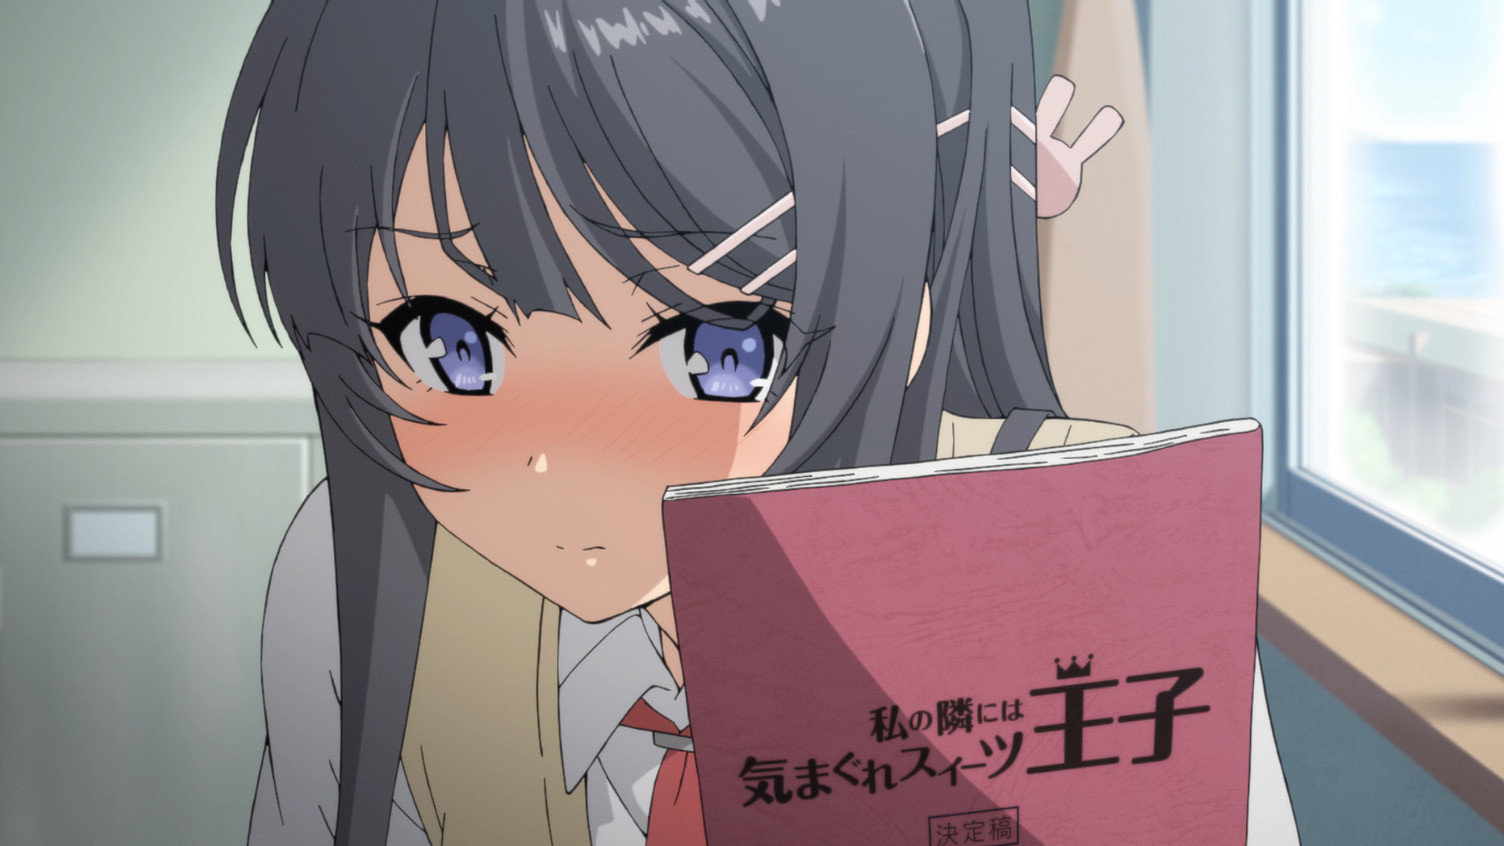 Bunny Girl Senpai Anime Gets in the Haunting Spirit With Halloween Event